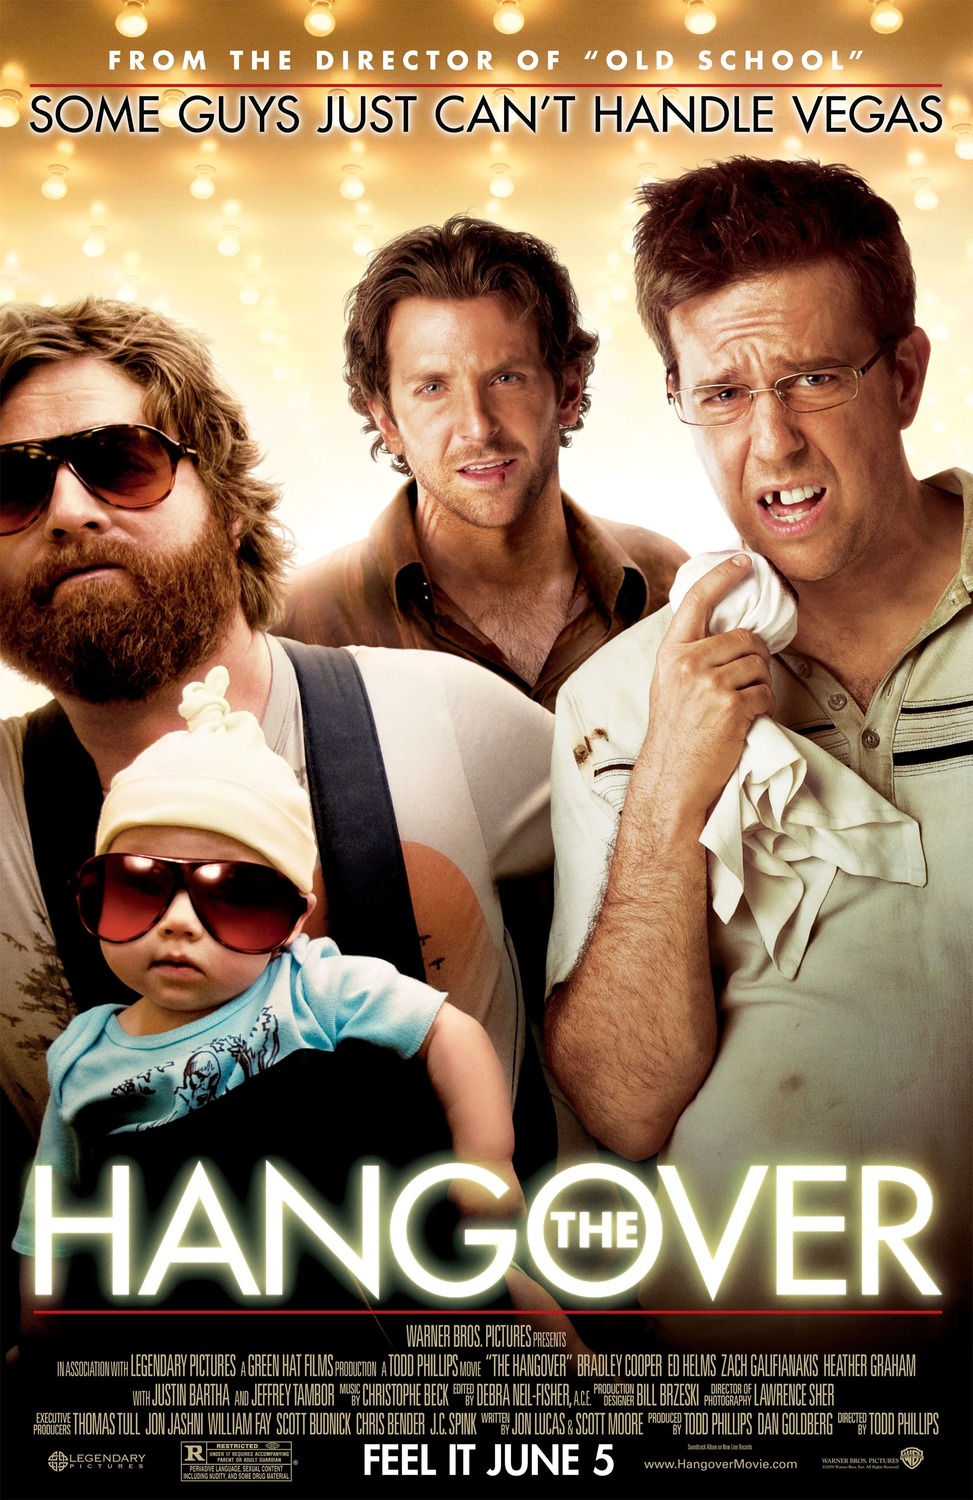 http://www.impawards.com/2009/posters/hangover_xlg.jpg